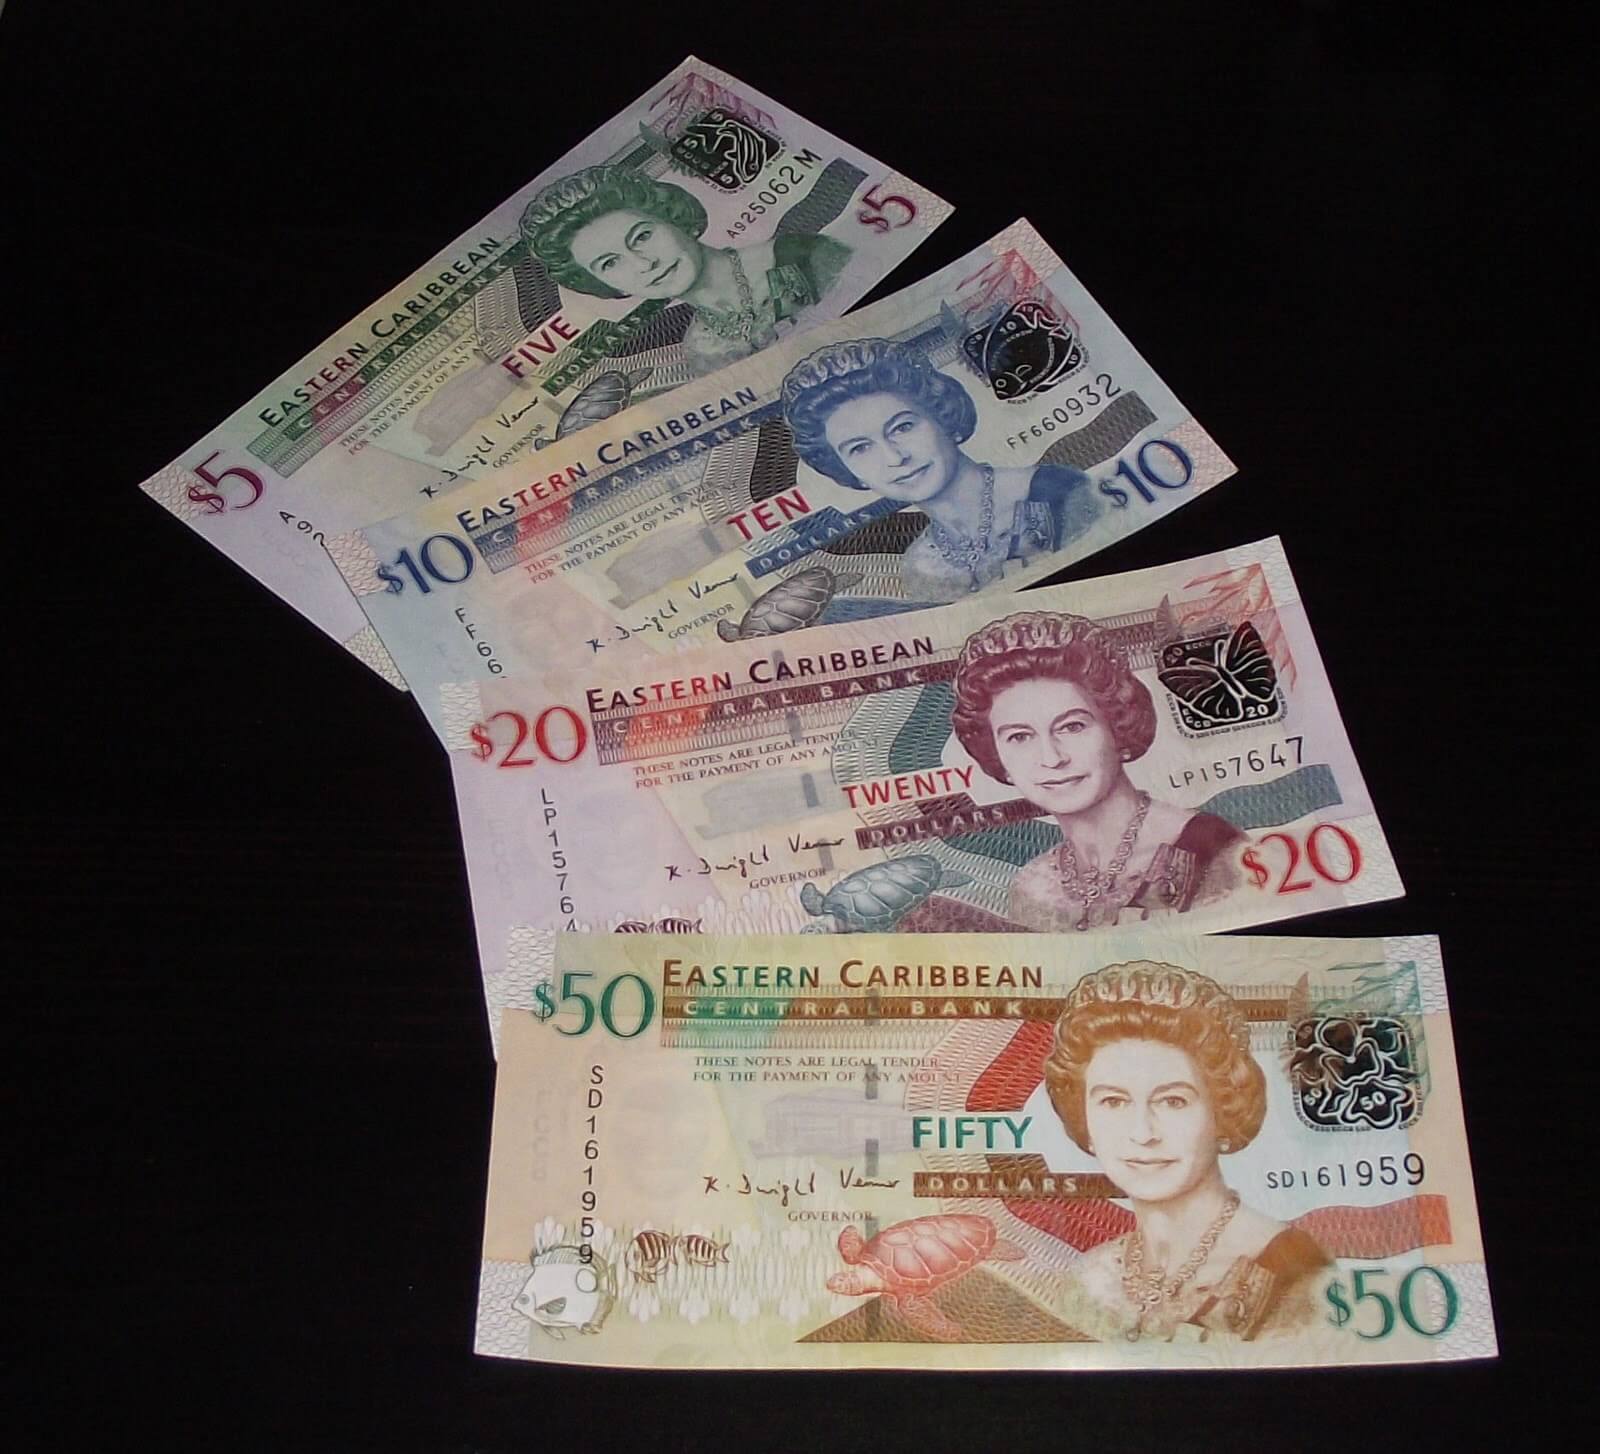 My collection of Eastern Caribbean Dollars.